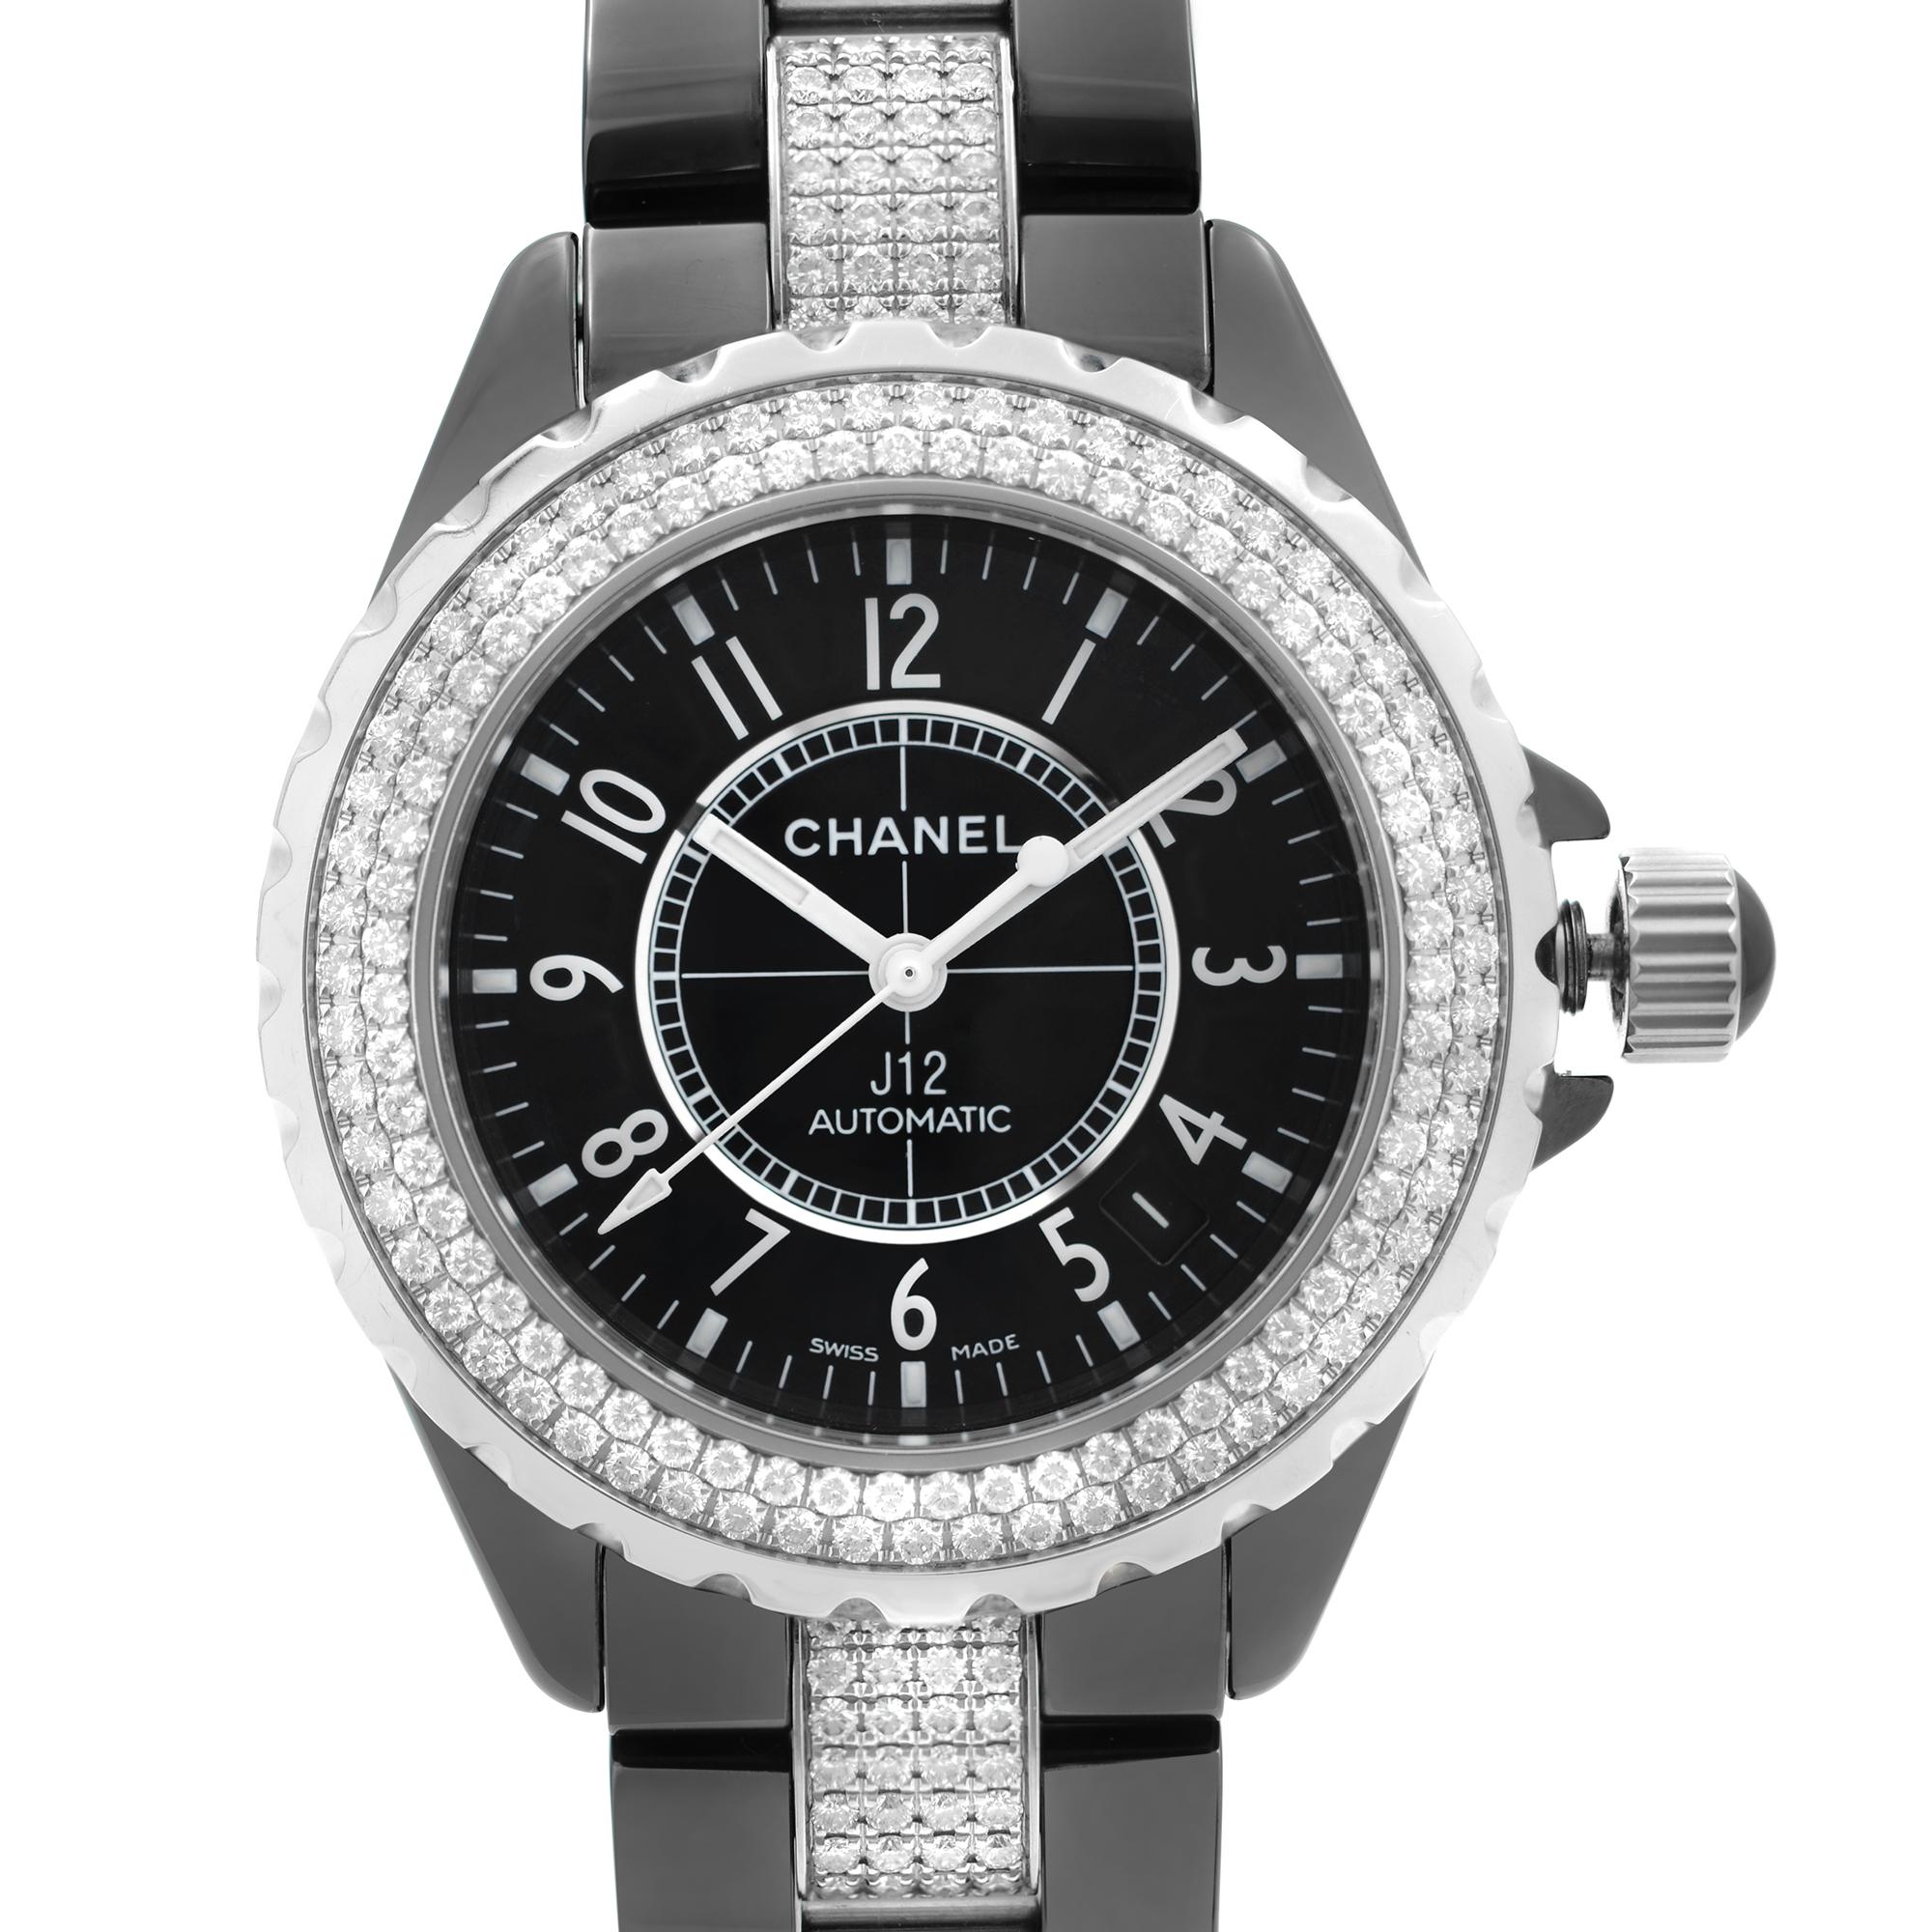 Store Display Model Chanel J12 Ceramic Black Dial Diamonds Bracelet Automatic Ladies Watch H1339. This Beautiful Timepiece Features: Black Ceramic Case with a Black Ceramic Bracelet with Diamond Center Links, Stainless Steel Bezel set with 2 Rows of